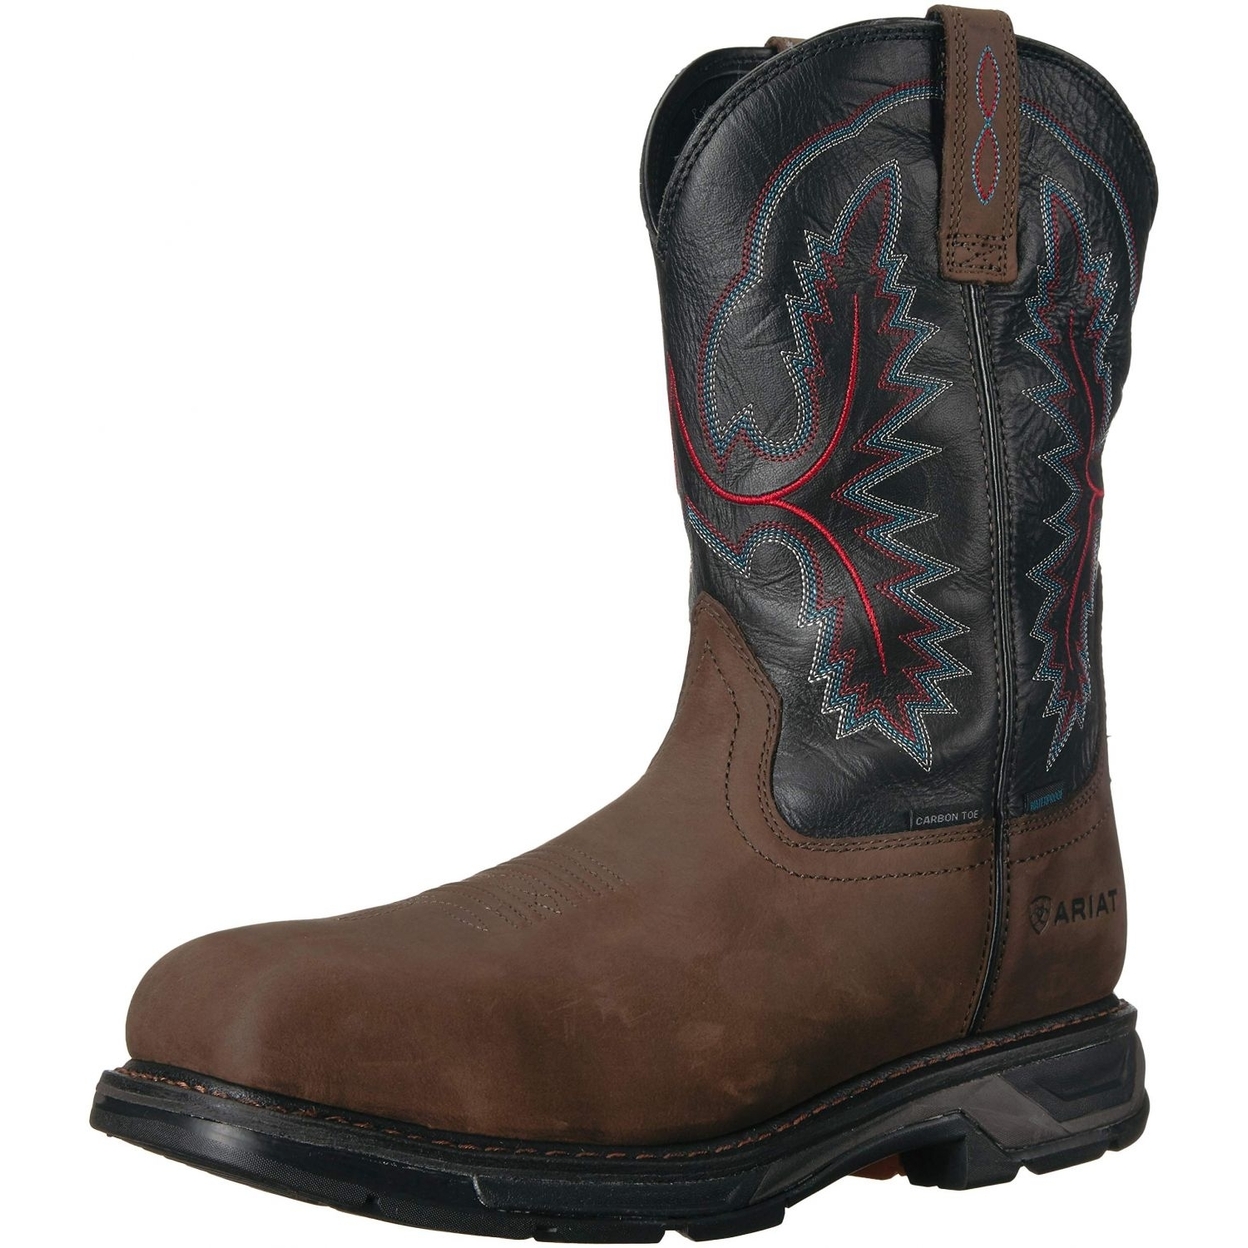 Ariat Work Men's Workhog XT H2O Carbon Toe Western Boot ONE SIZE BRK/ FOREST - BRK/ FOREST, 10-2E